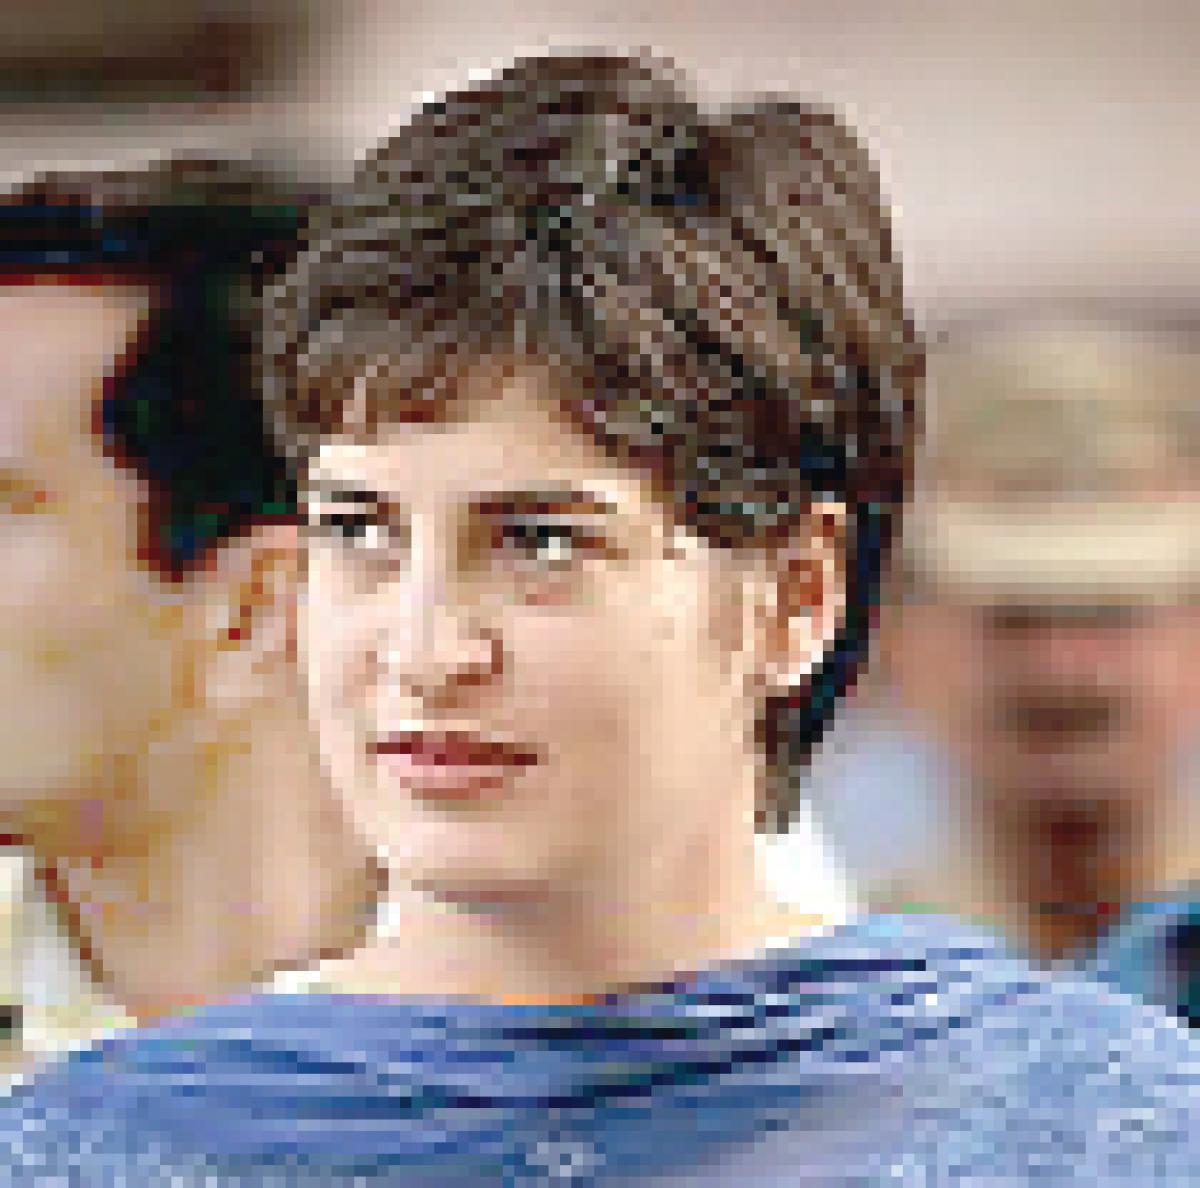 Congress workers, analysts, husband and BJP, Priyanka Gandhi under watchful  gaze of many - The Economic Times